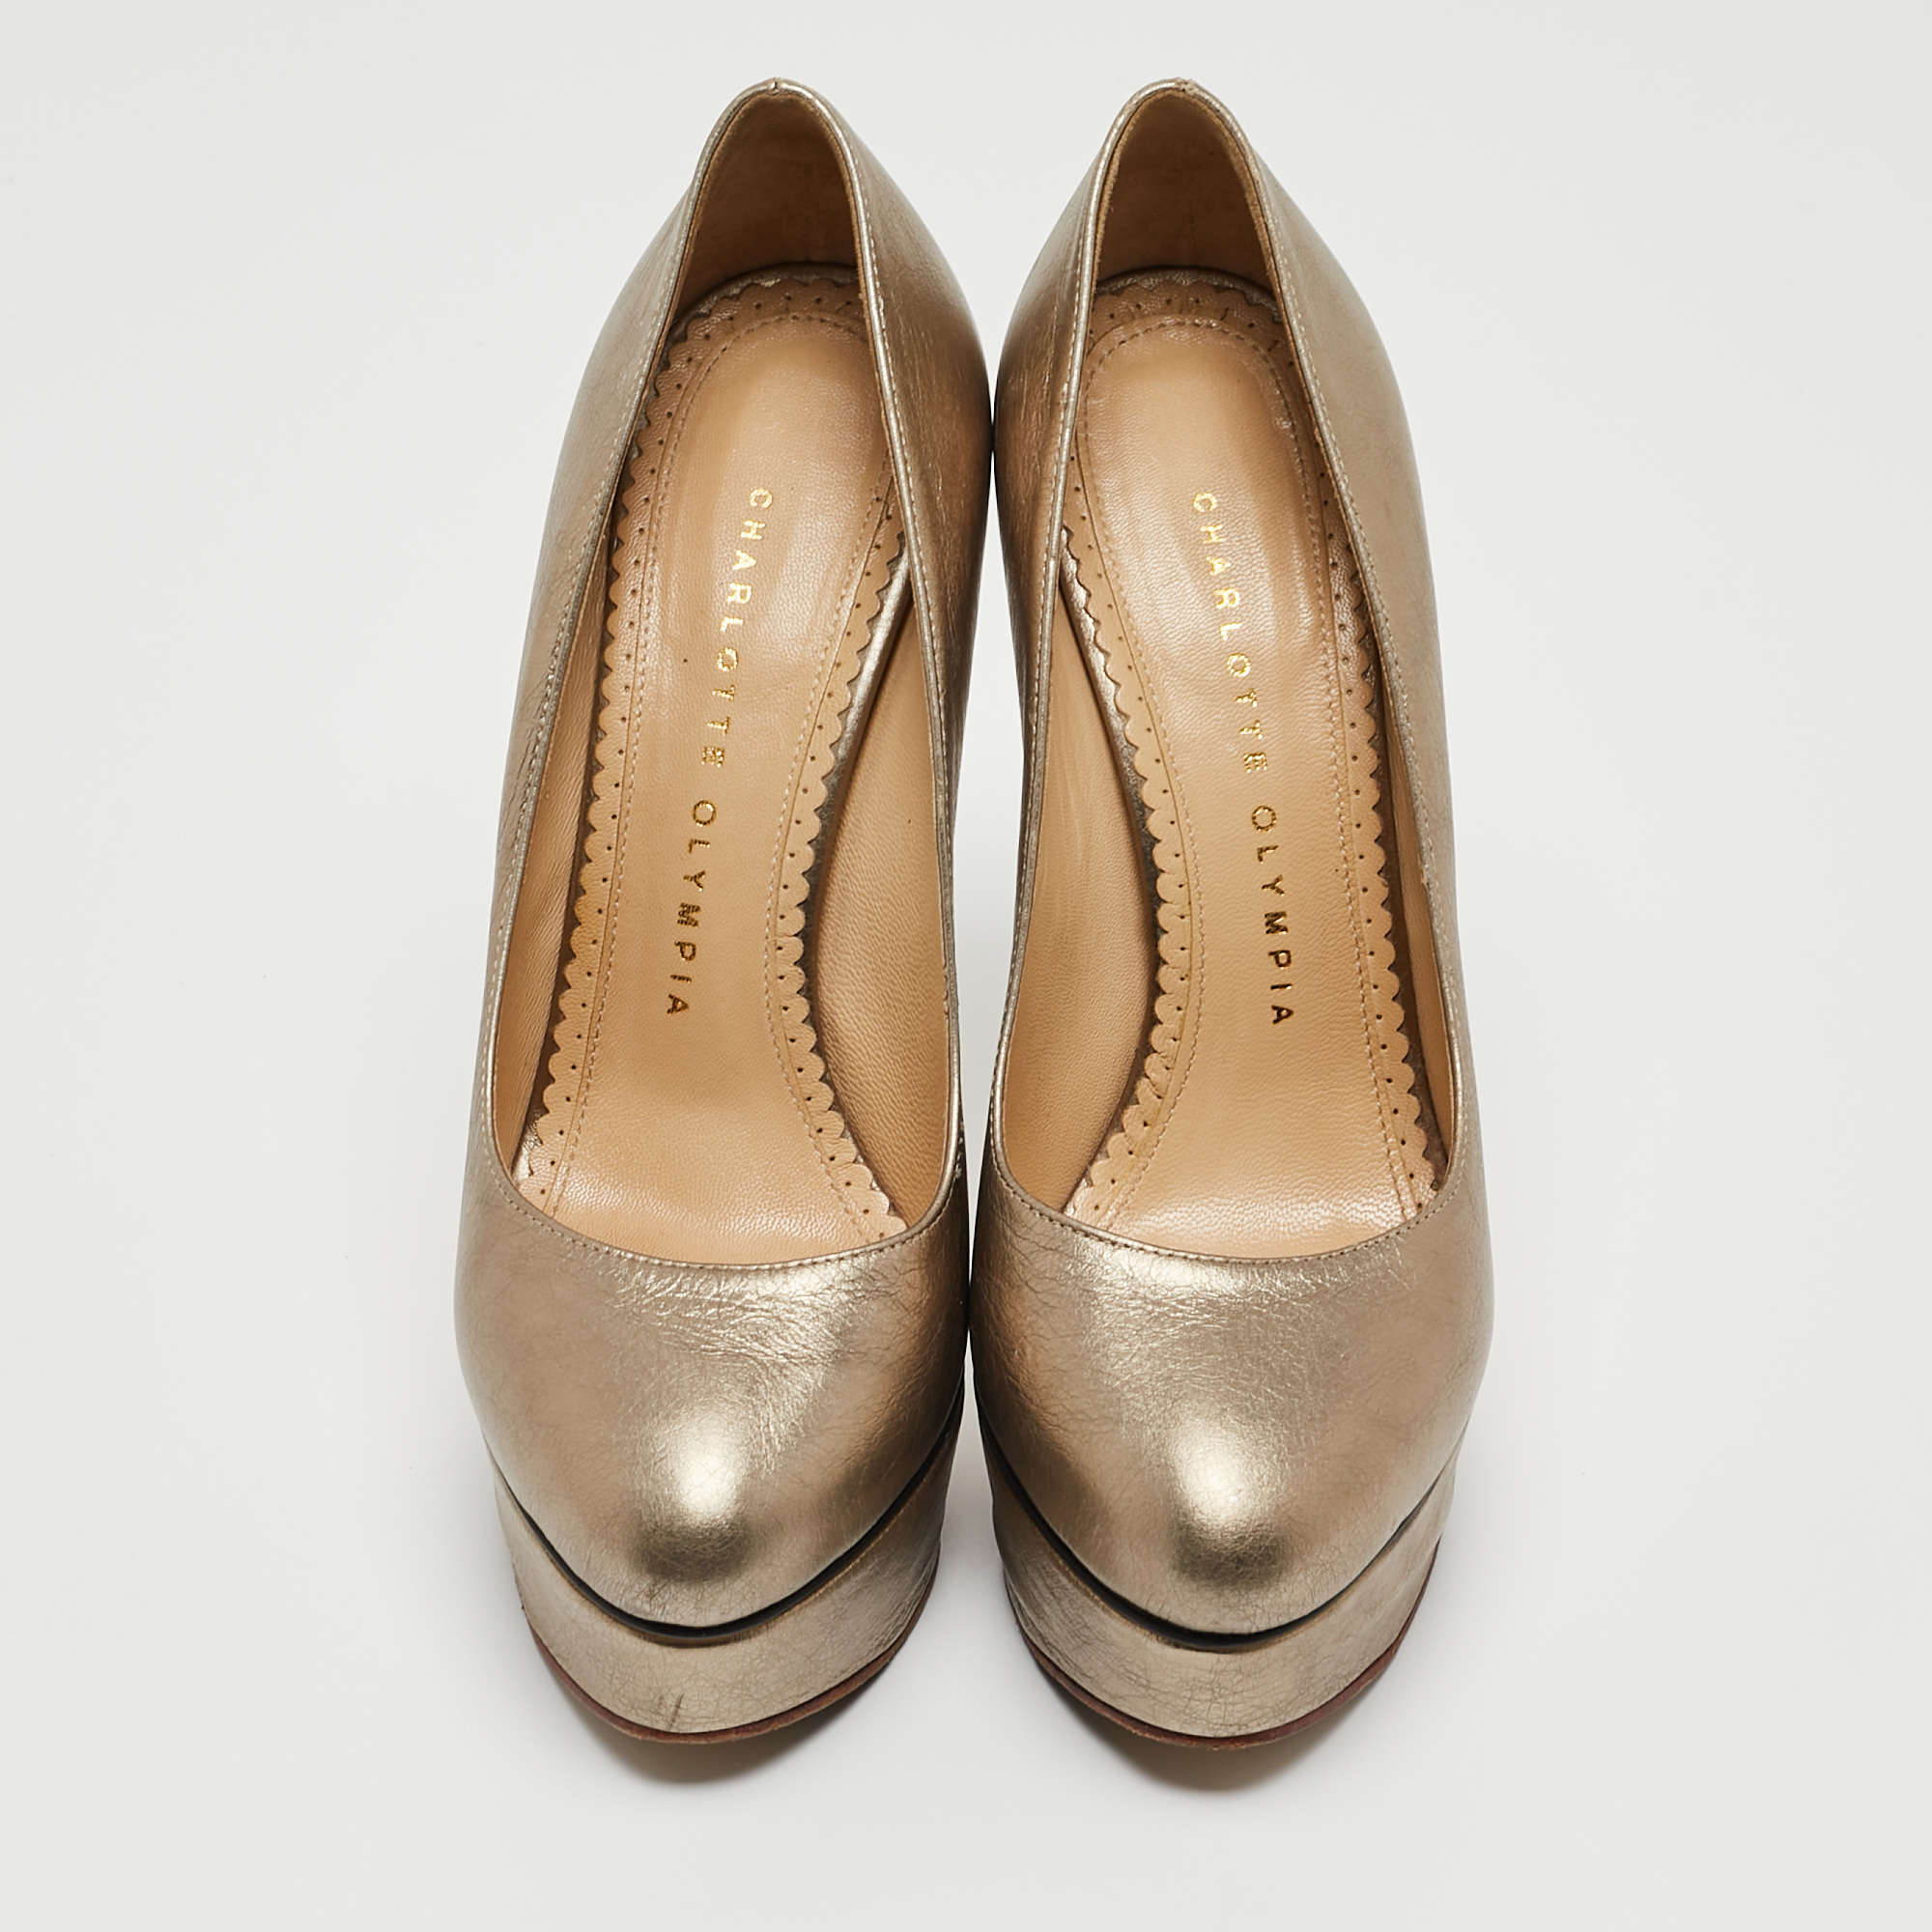 Charlotte Olympia Metallic Leather Dolly Platform Pumps Size 36.5